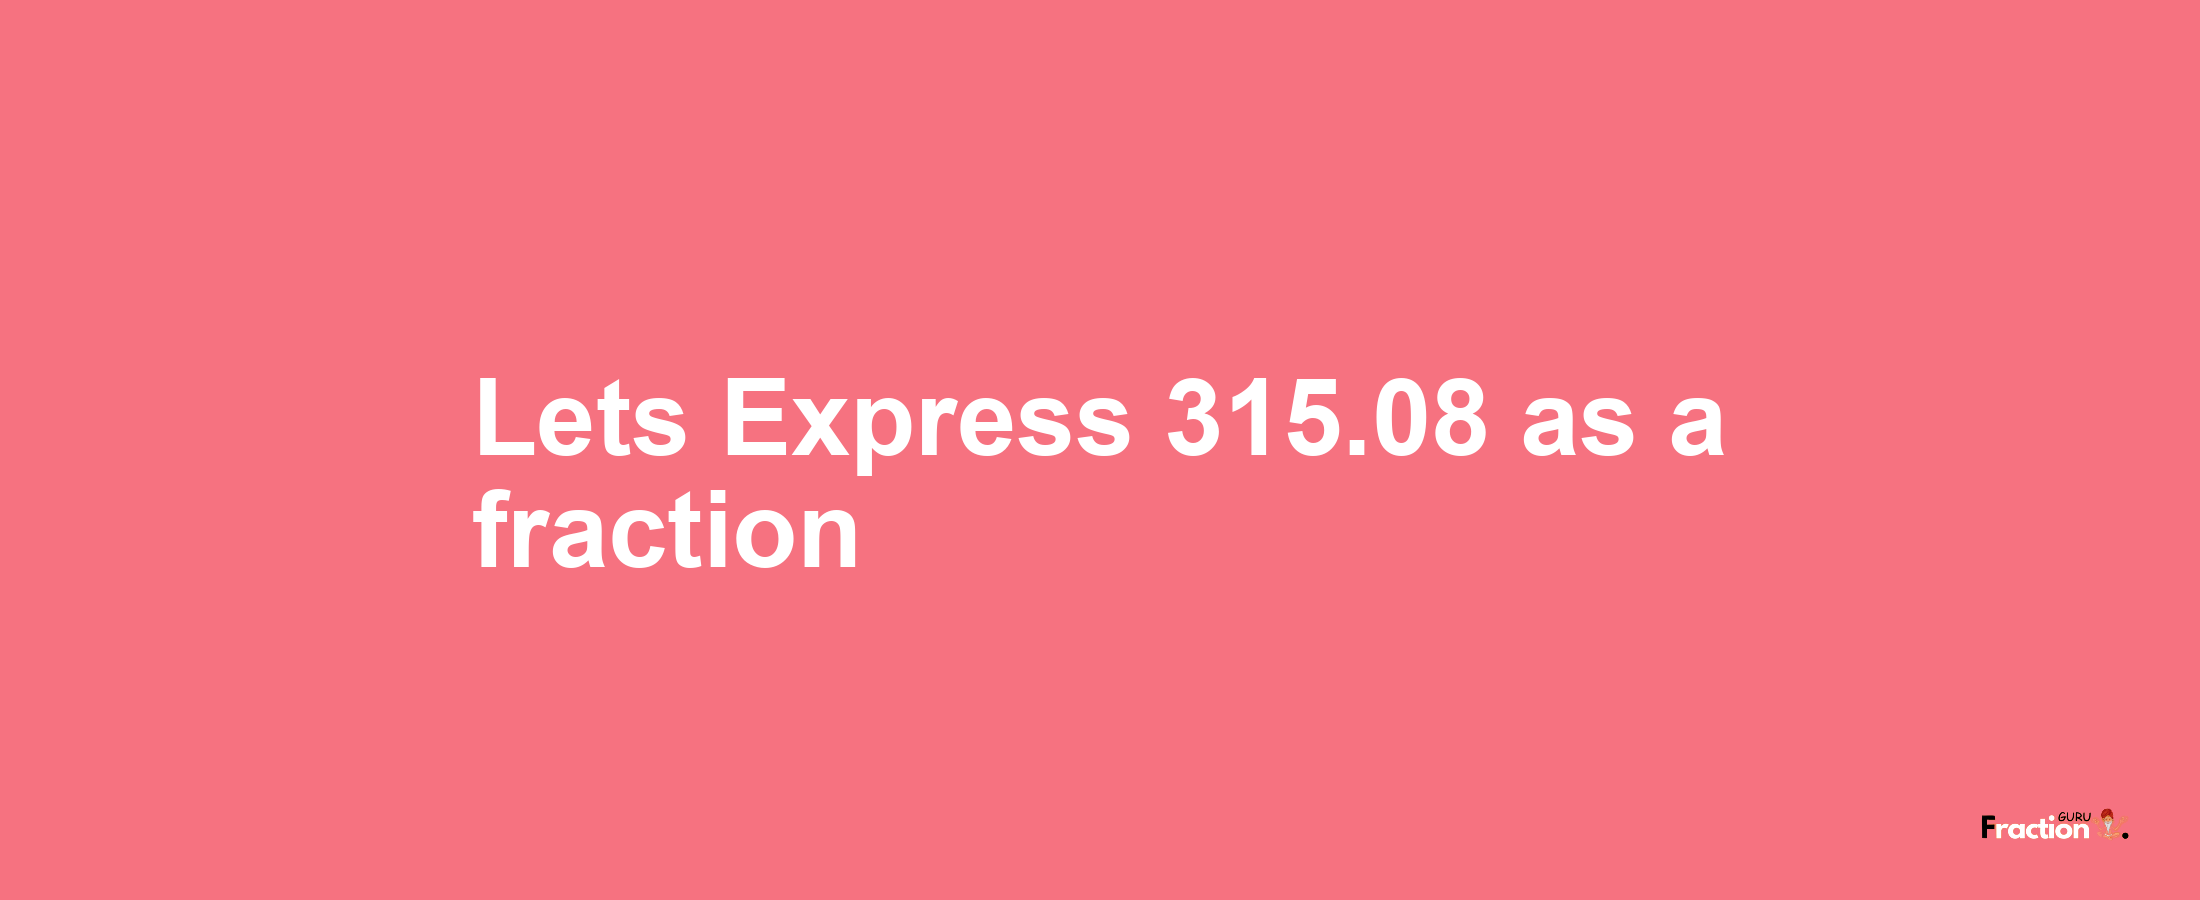 Lets Express 315.08 as afraction